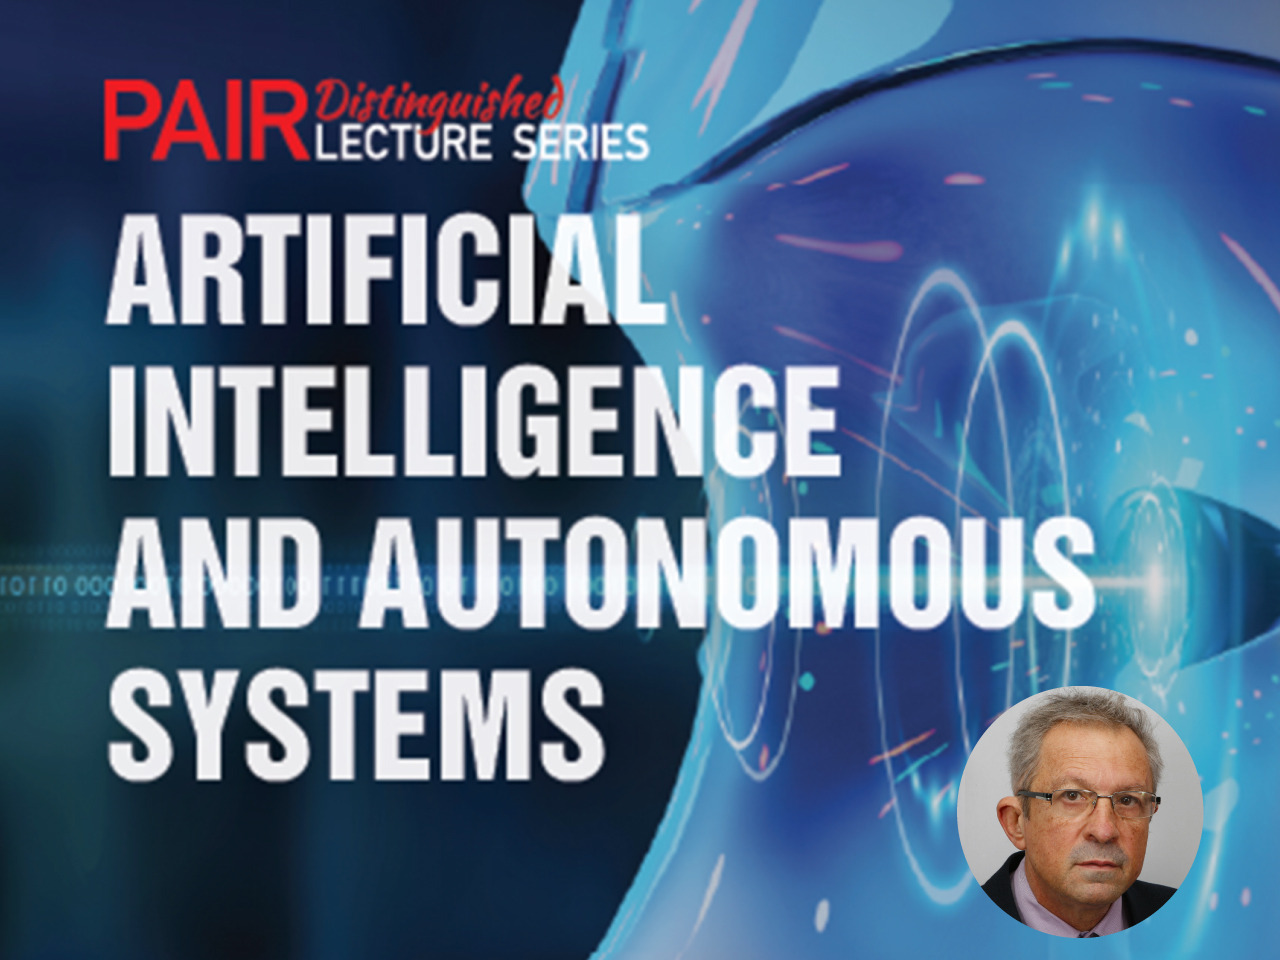 link to PAIR Distinguished Lecture Series: Artificial intelligence and autonomous systems